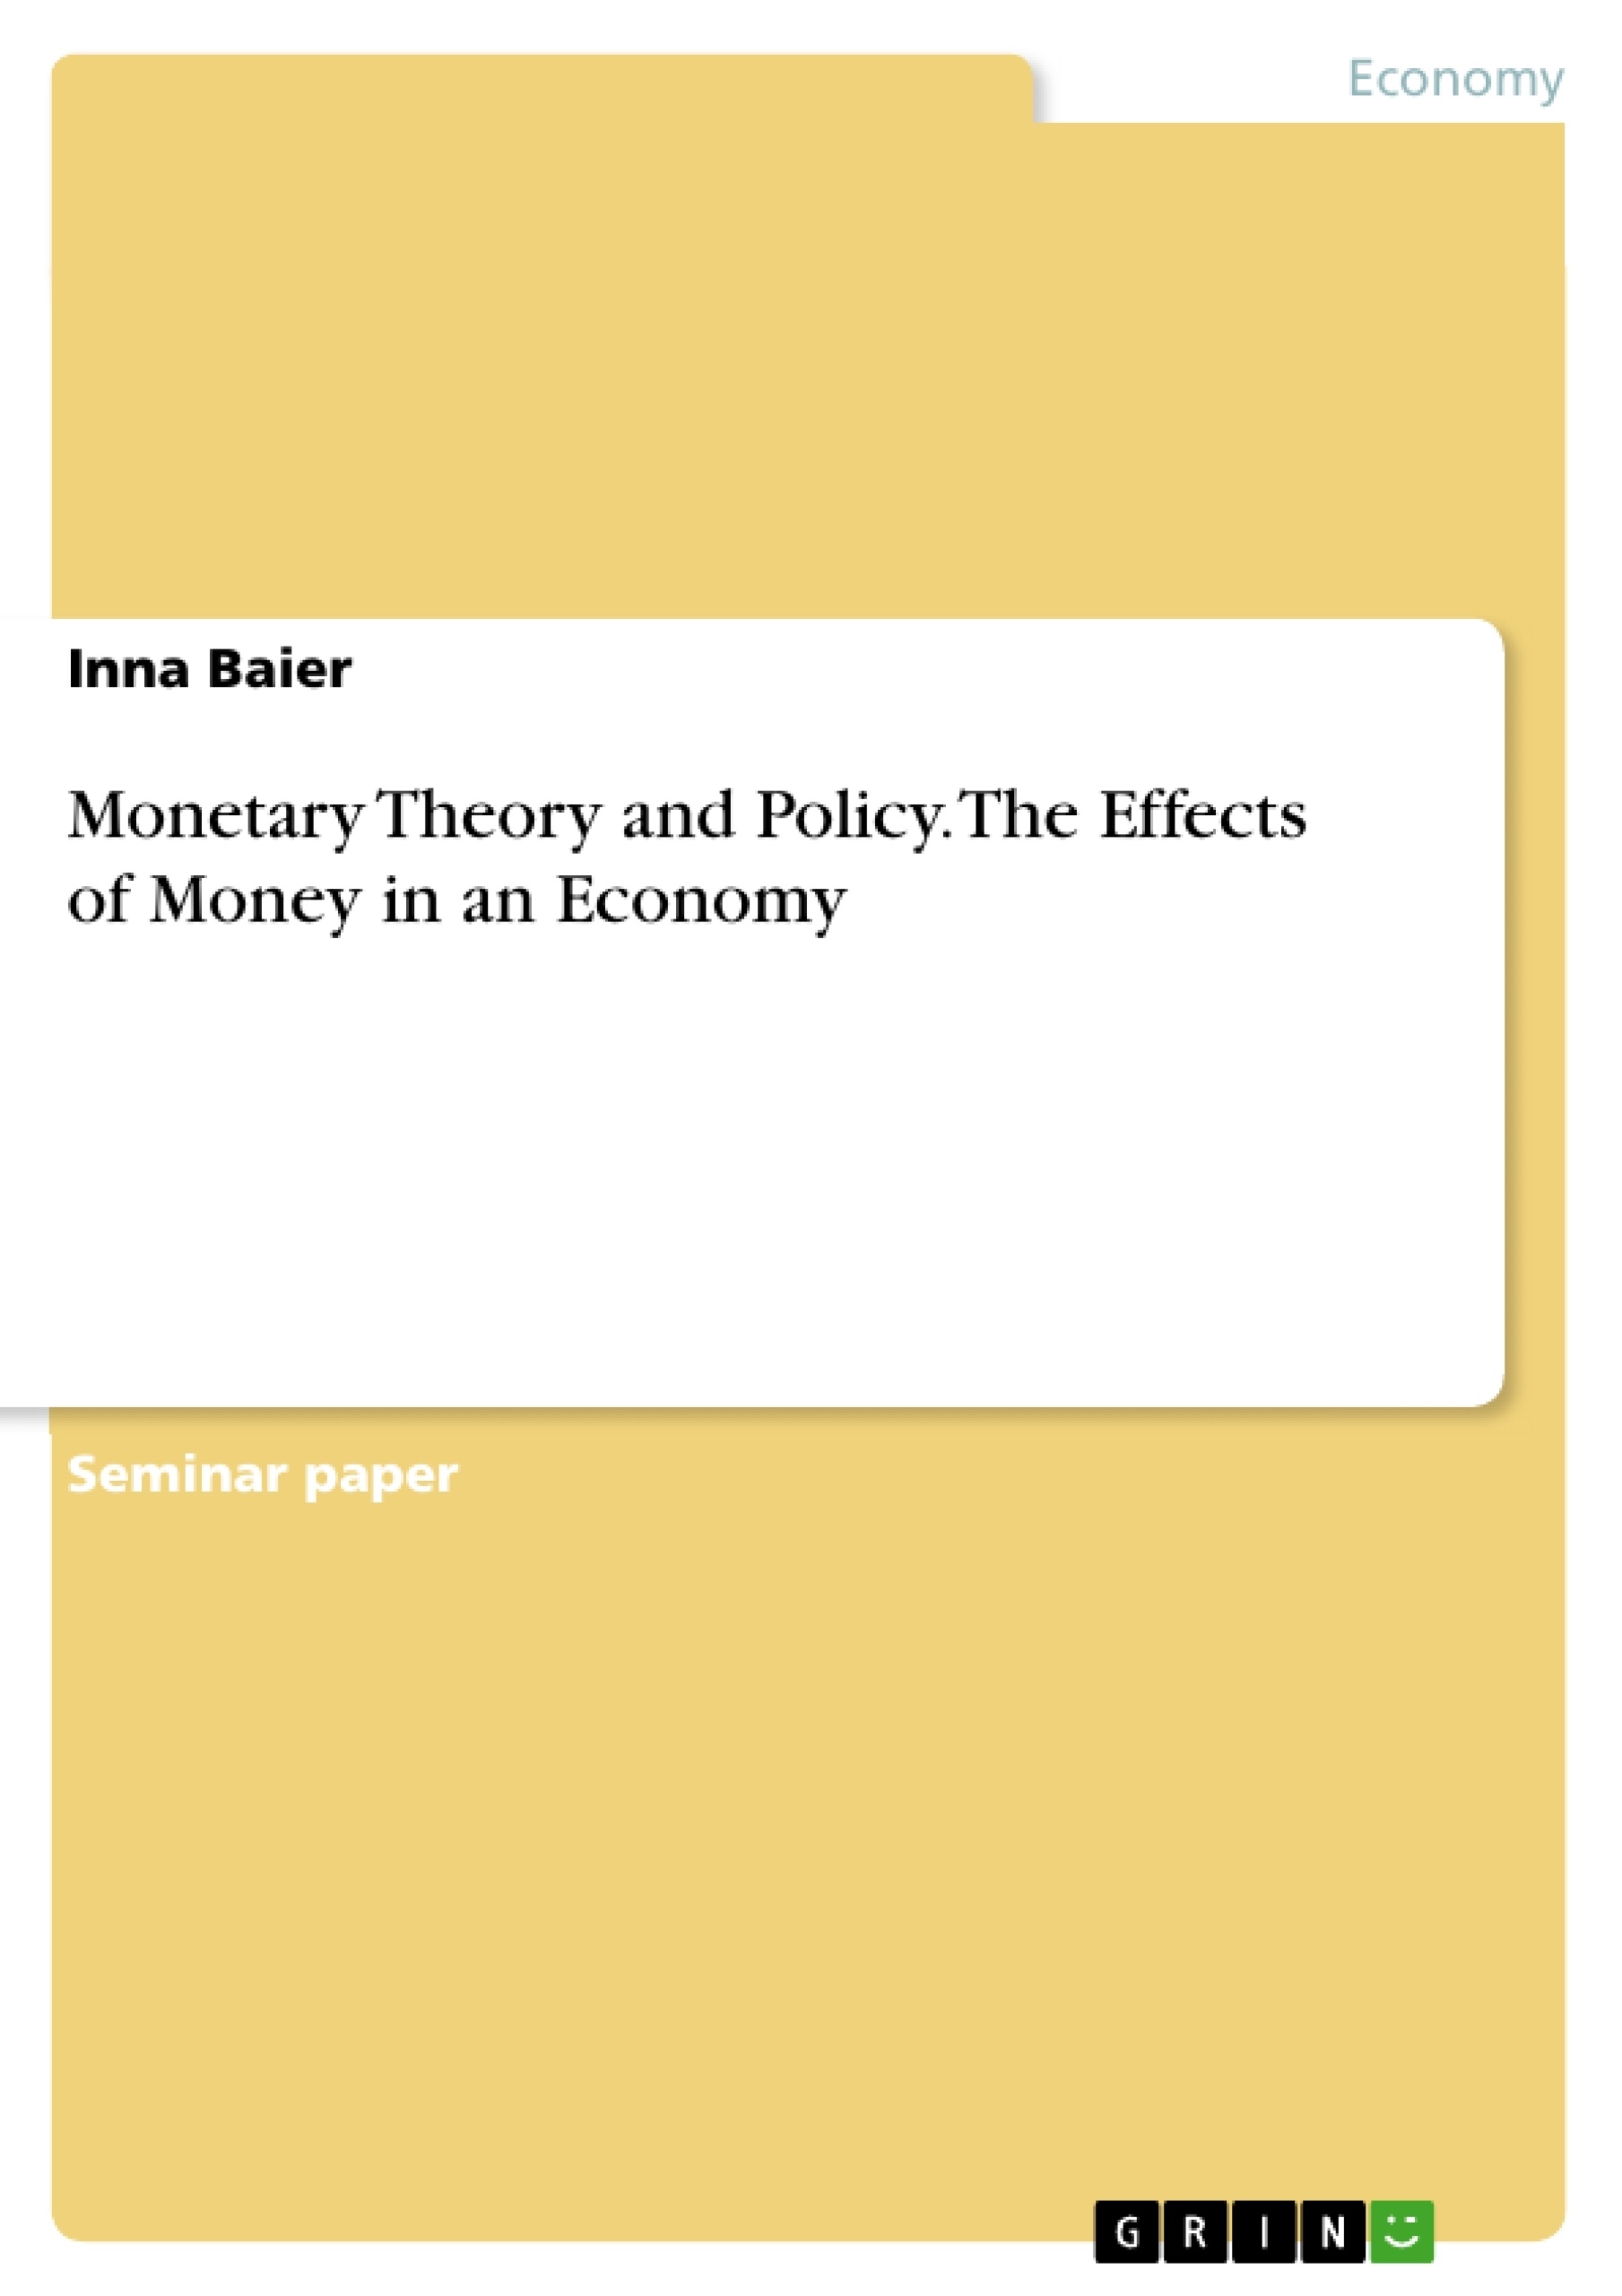 Title: Monetary Theory and Policy. The Effects of Money in an Economy